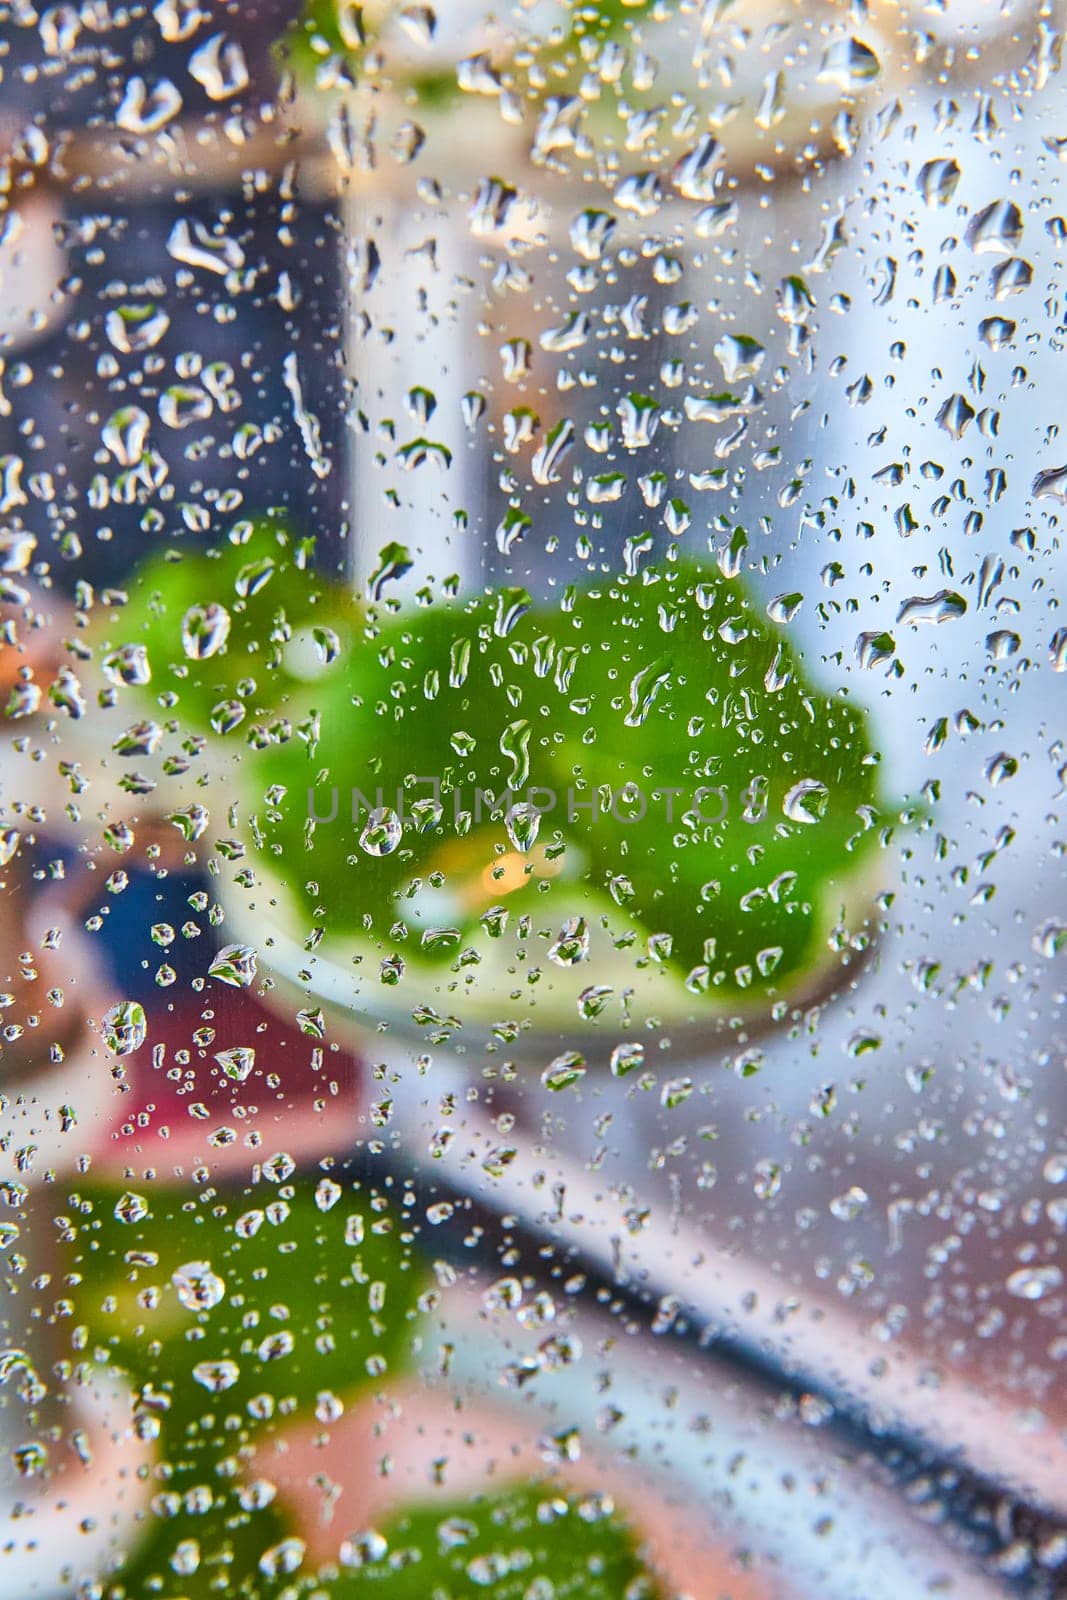 Image of Water droplets on glass with blurry green plant in background